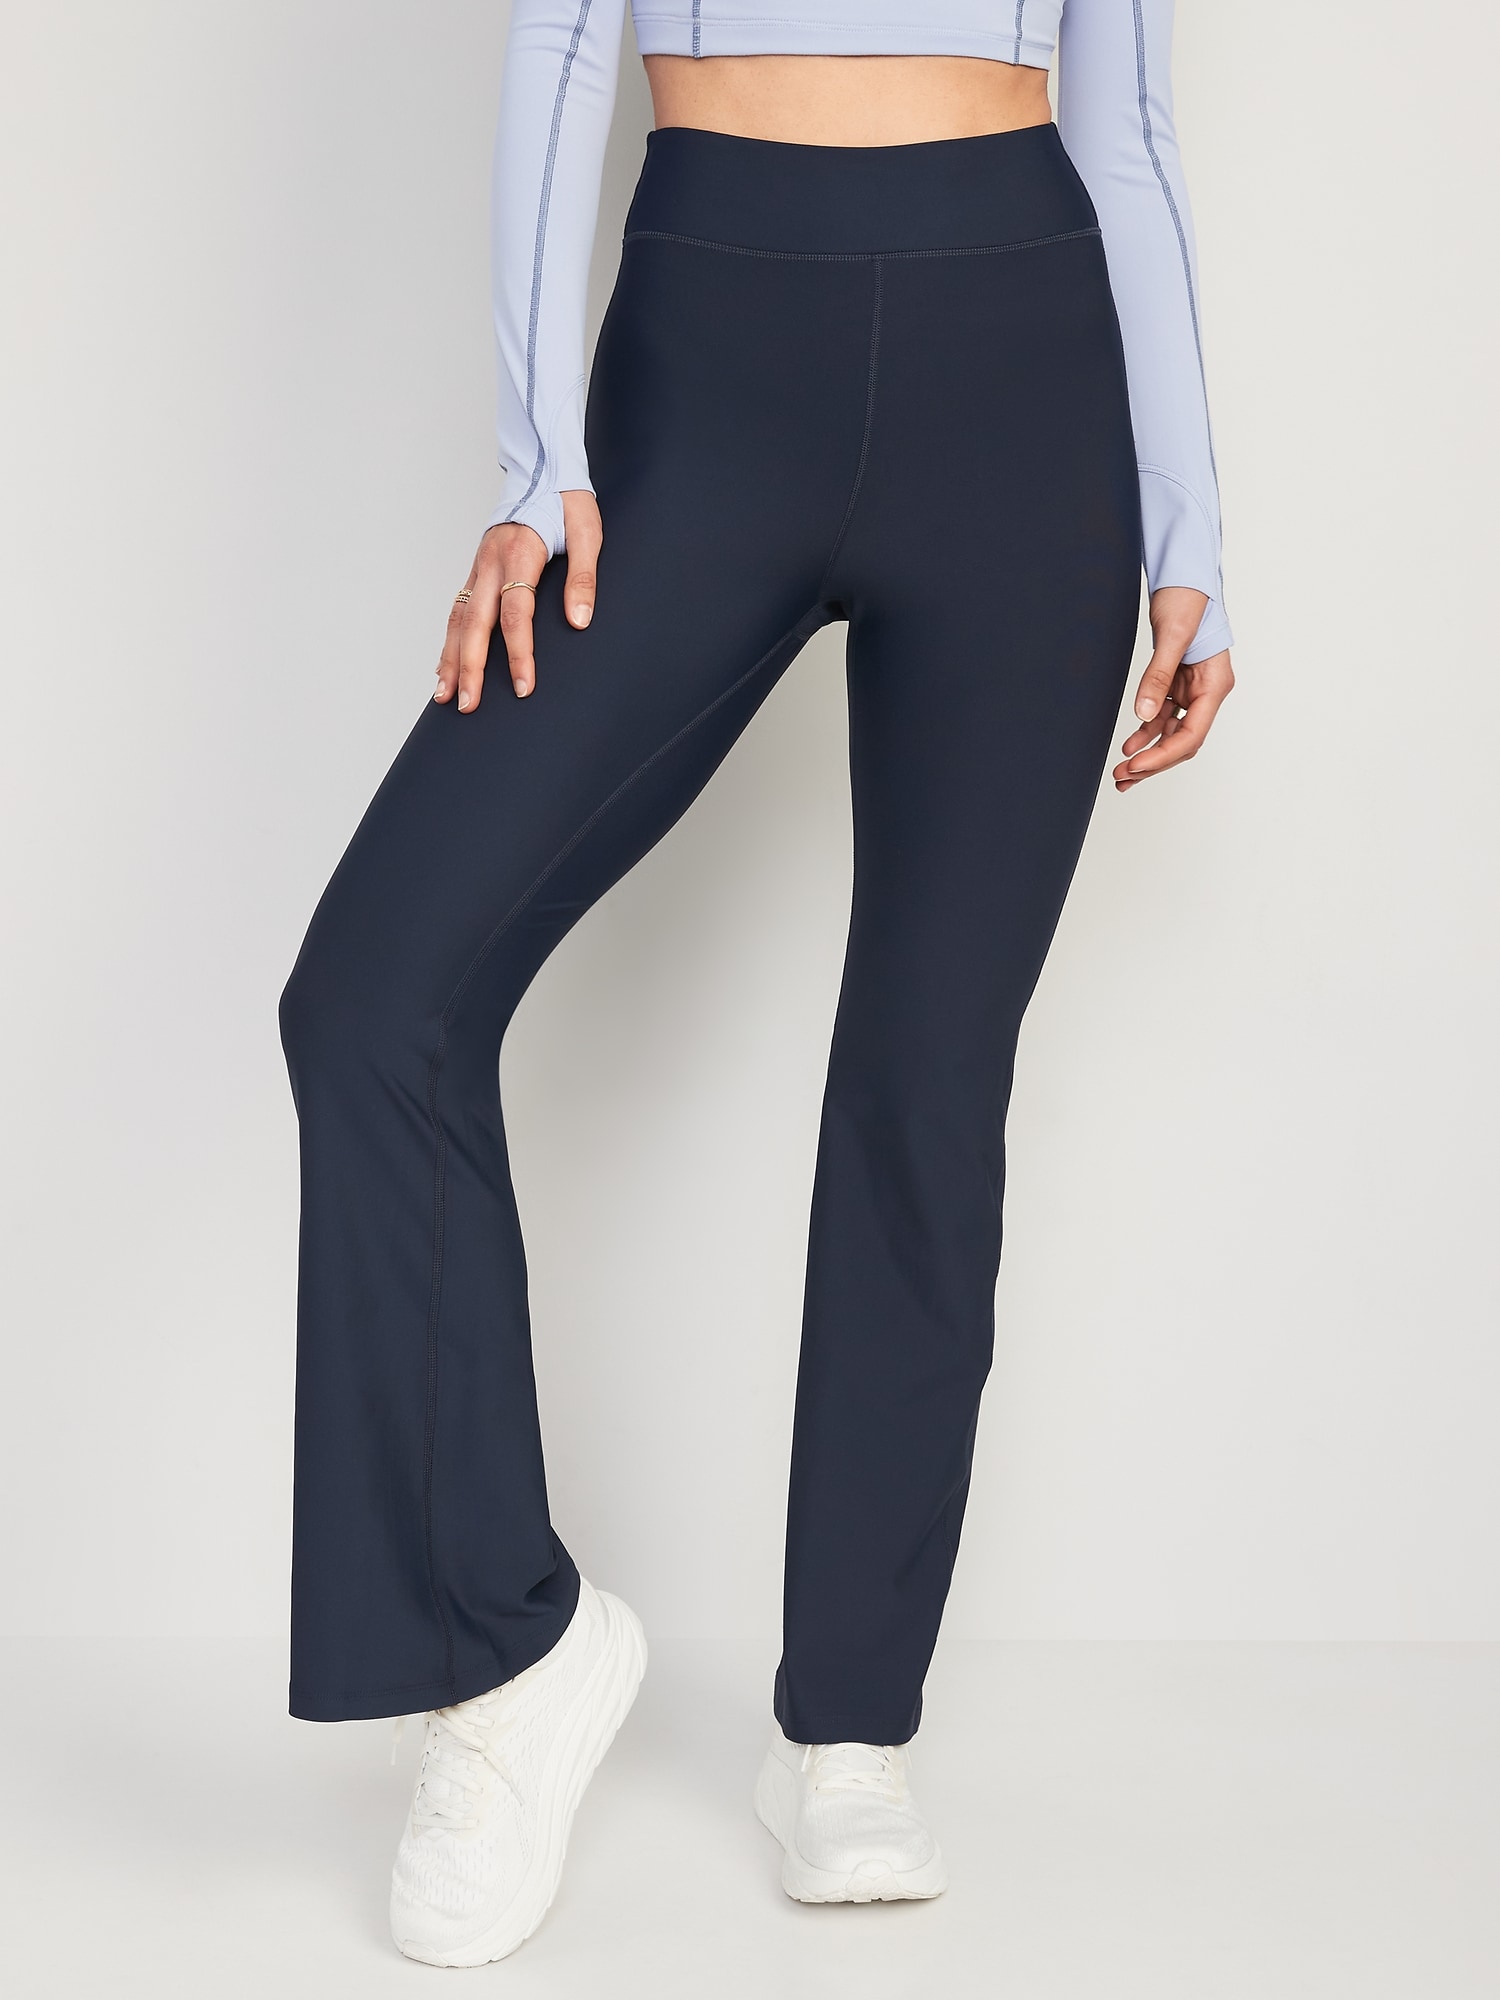 These Old Navy Yoga Pants Look Like Slacks and Are Perfect for Travel